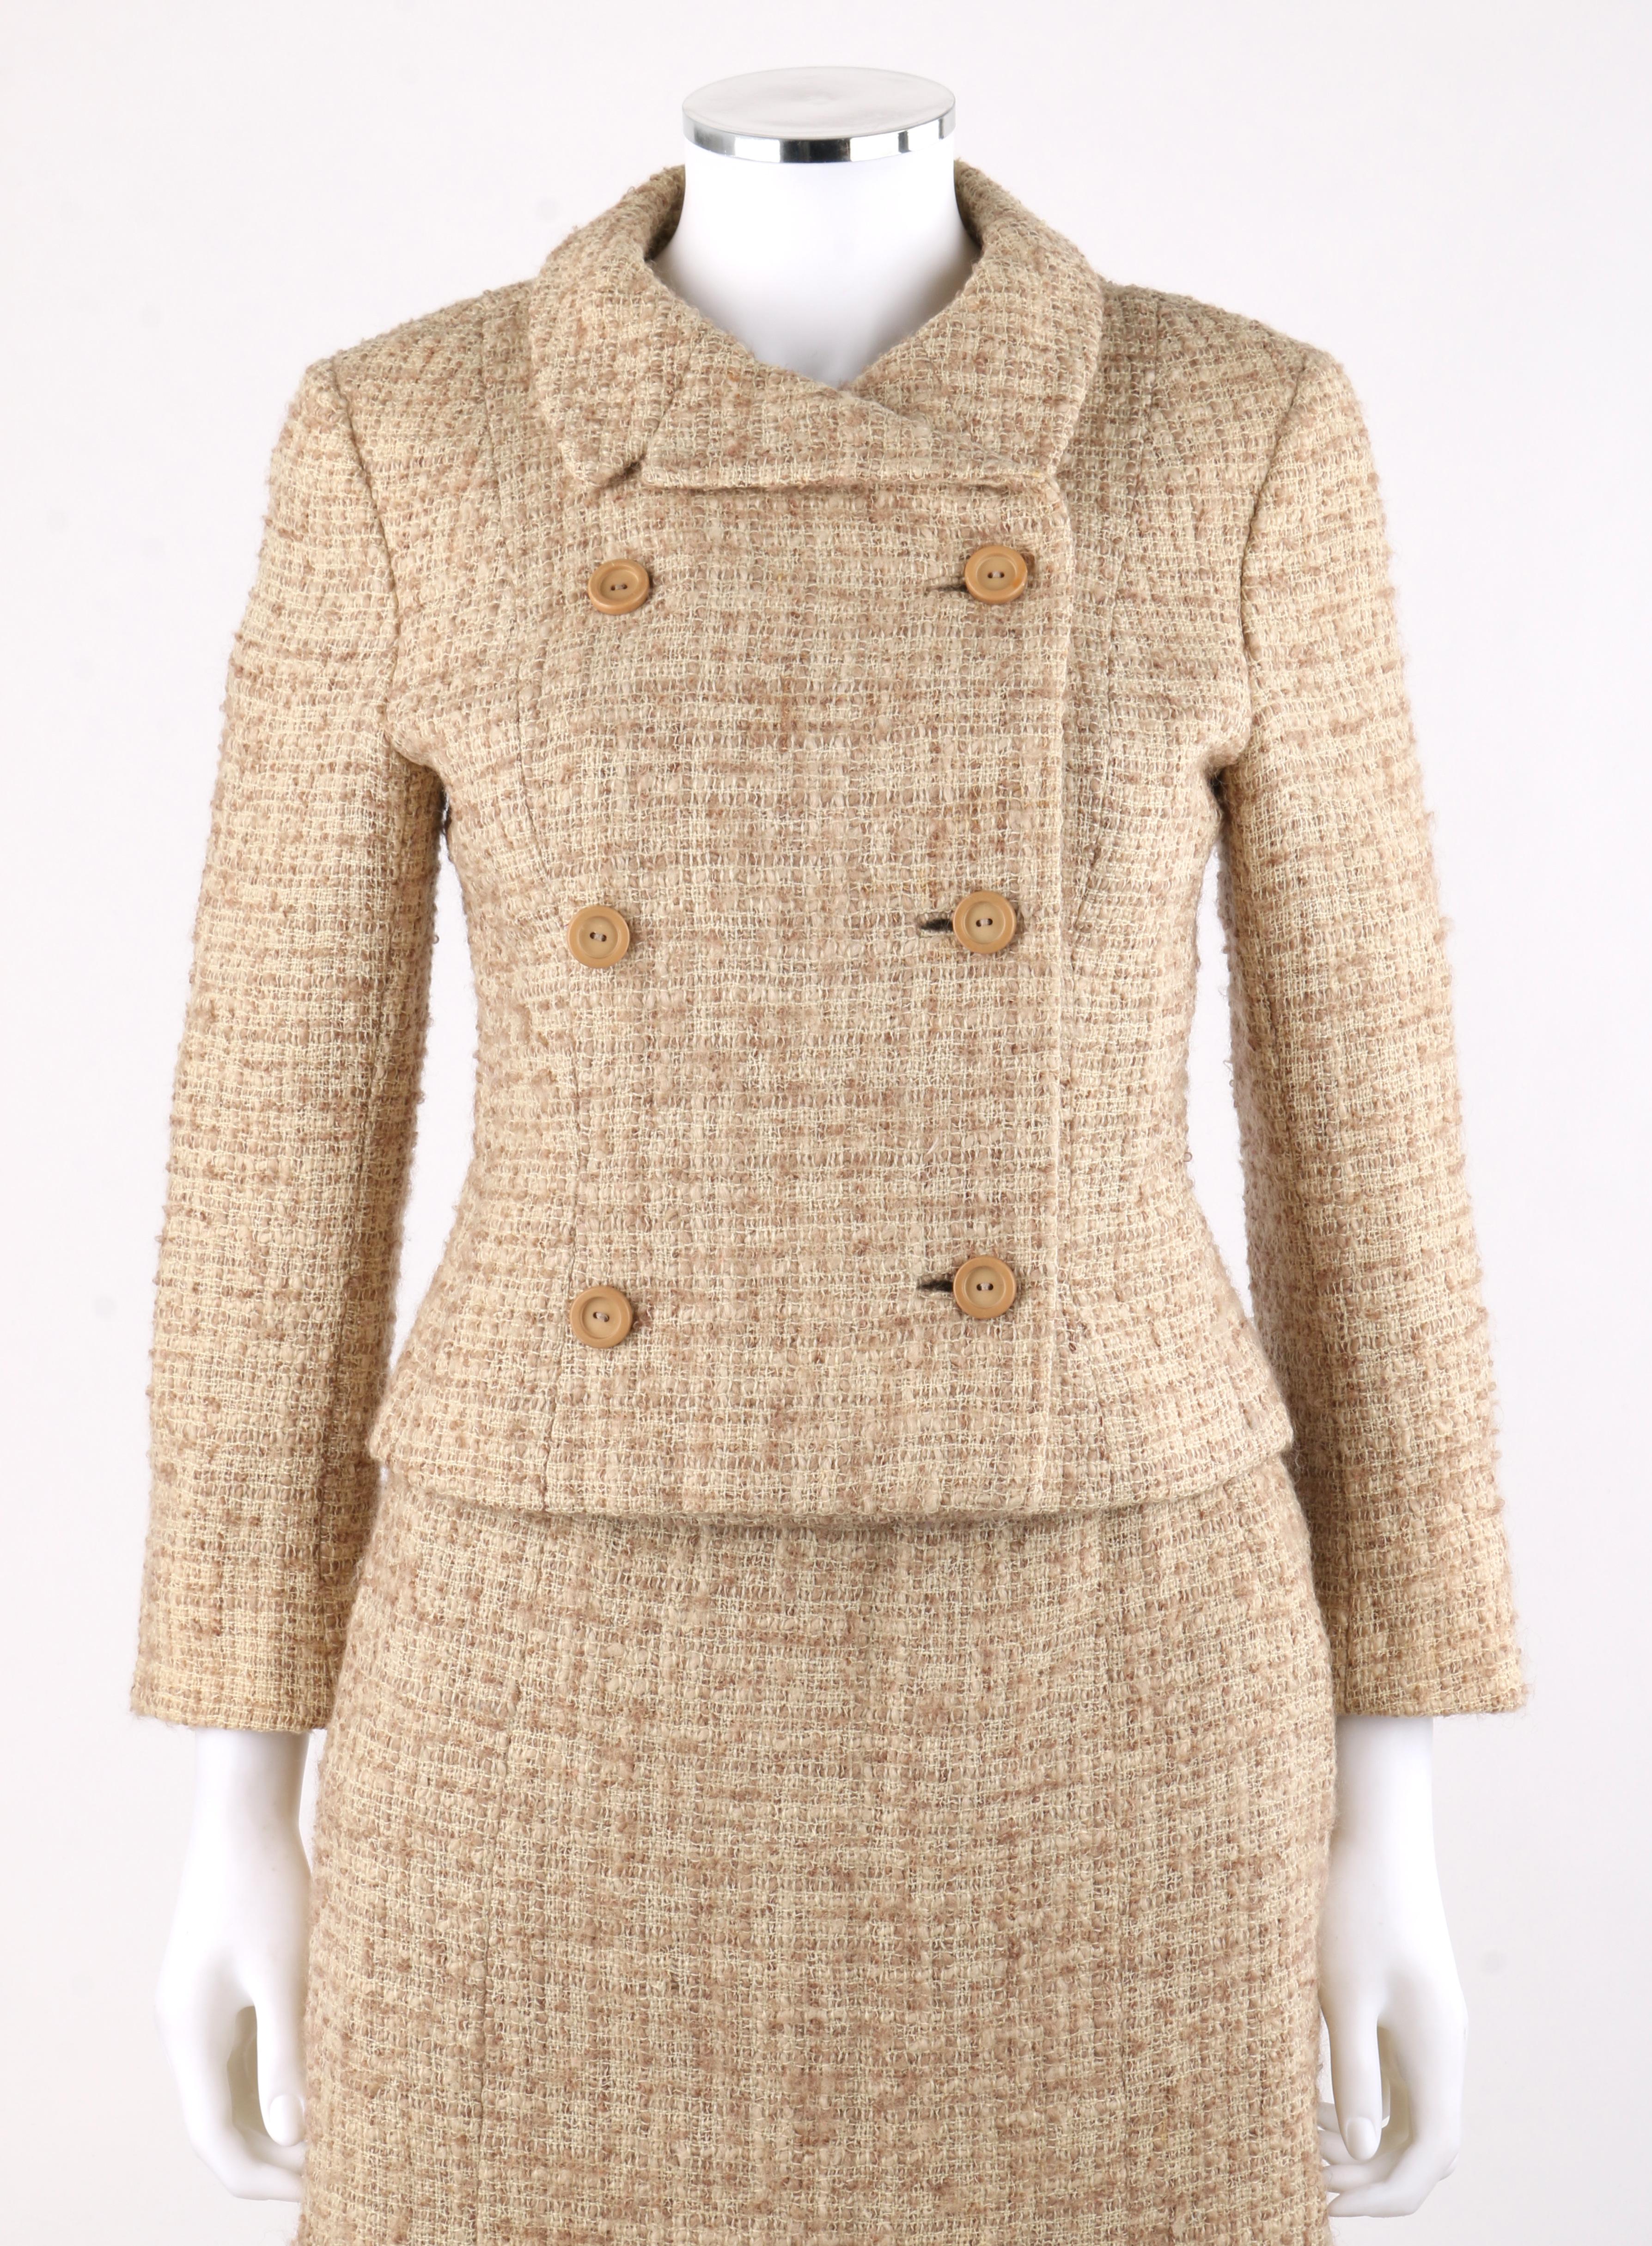 EISA c.1950’s CRISTOBAL BALENCIAGA Tweed Double Breasted Jacket Skirt Suit Set
 
Circa: 1960’s
Label(s): EISA
Designer: Cristobal Balenciaga
Style: Double-breasted cropped jacket with notched lapel and fitted sheath skirt 
Color(s): Shades of cream